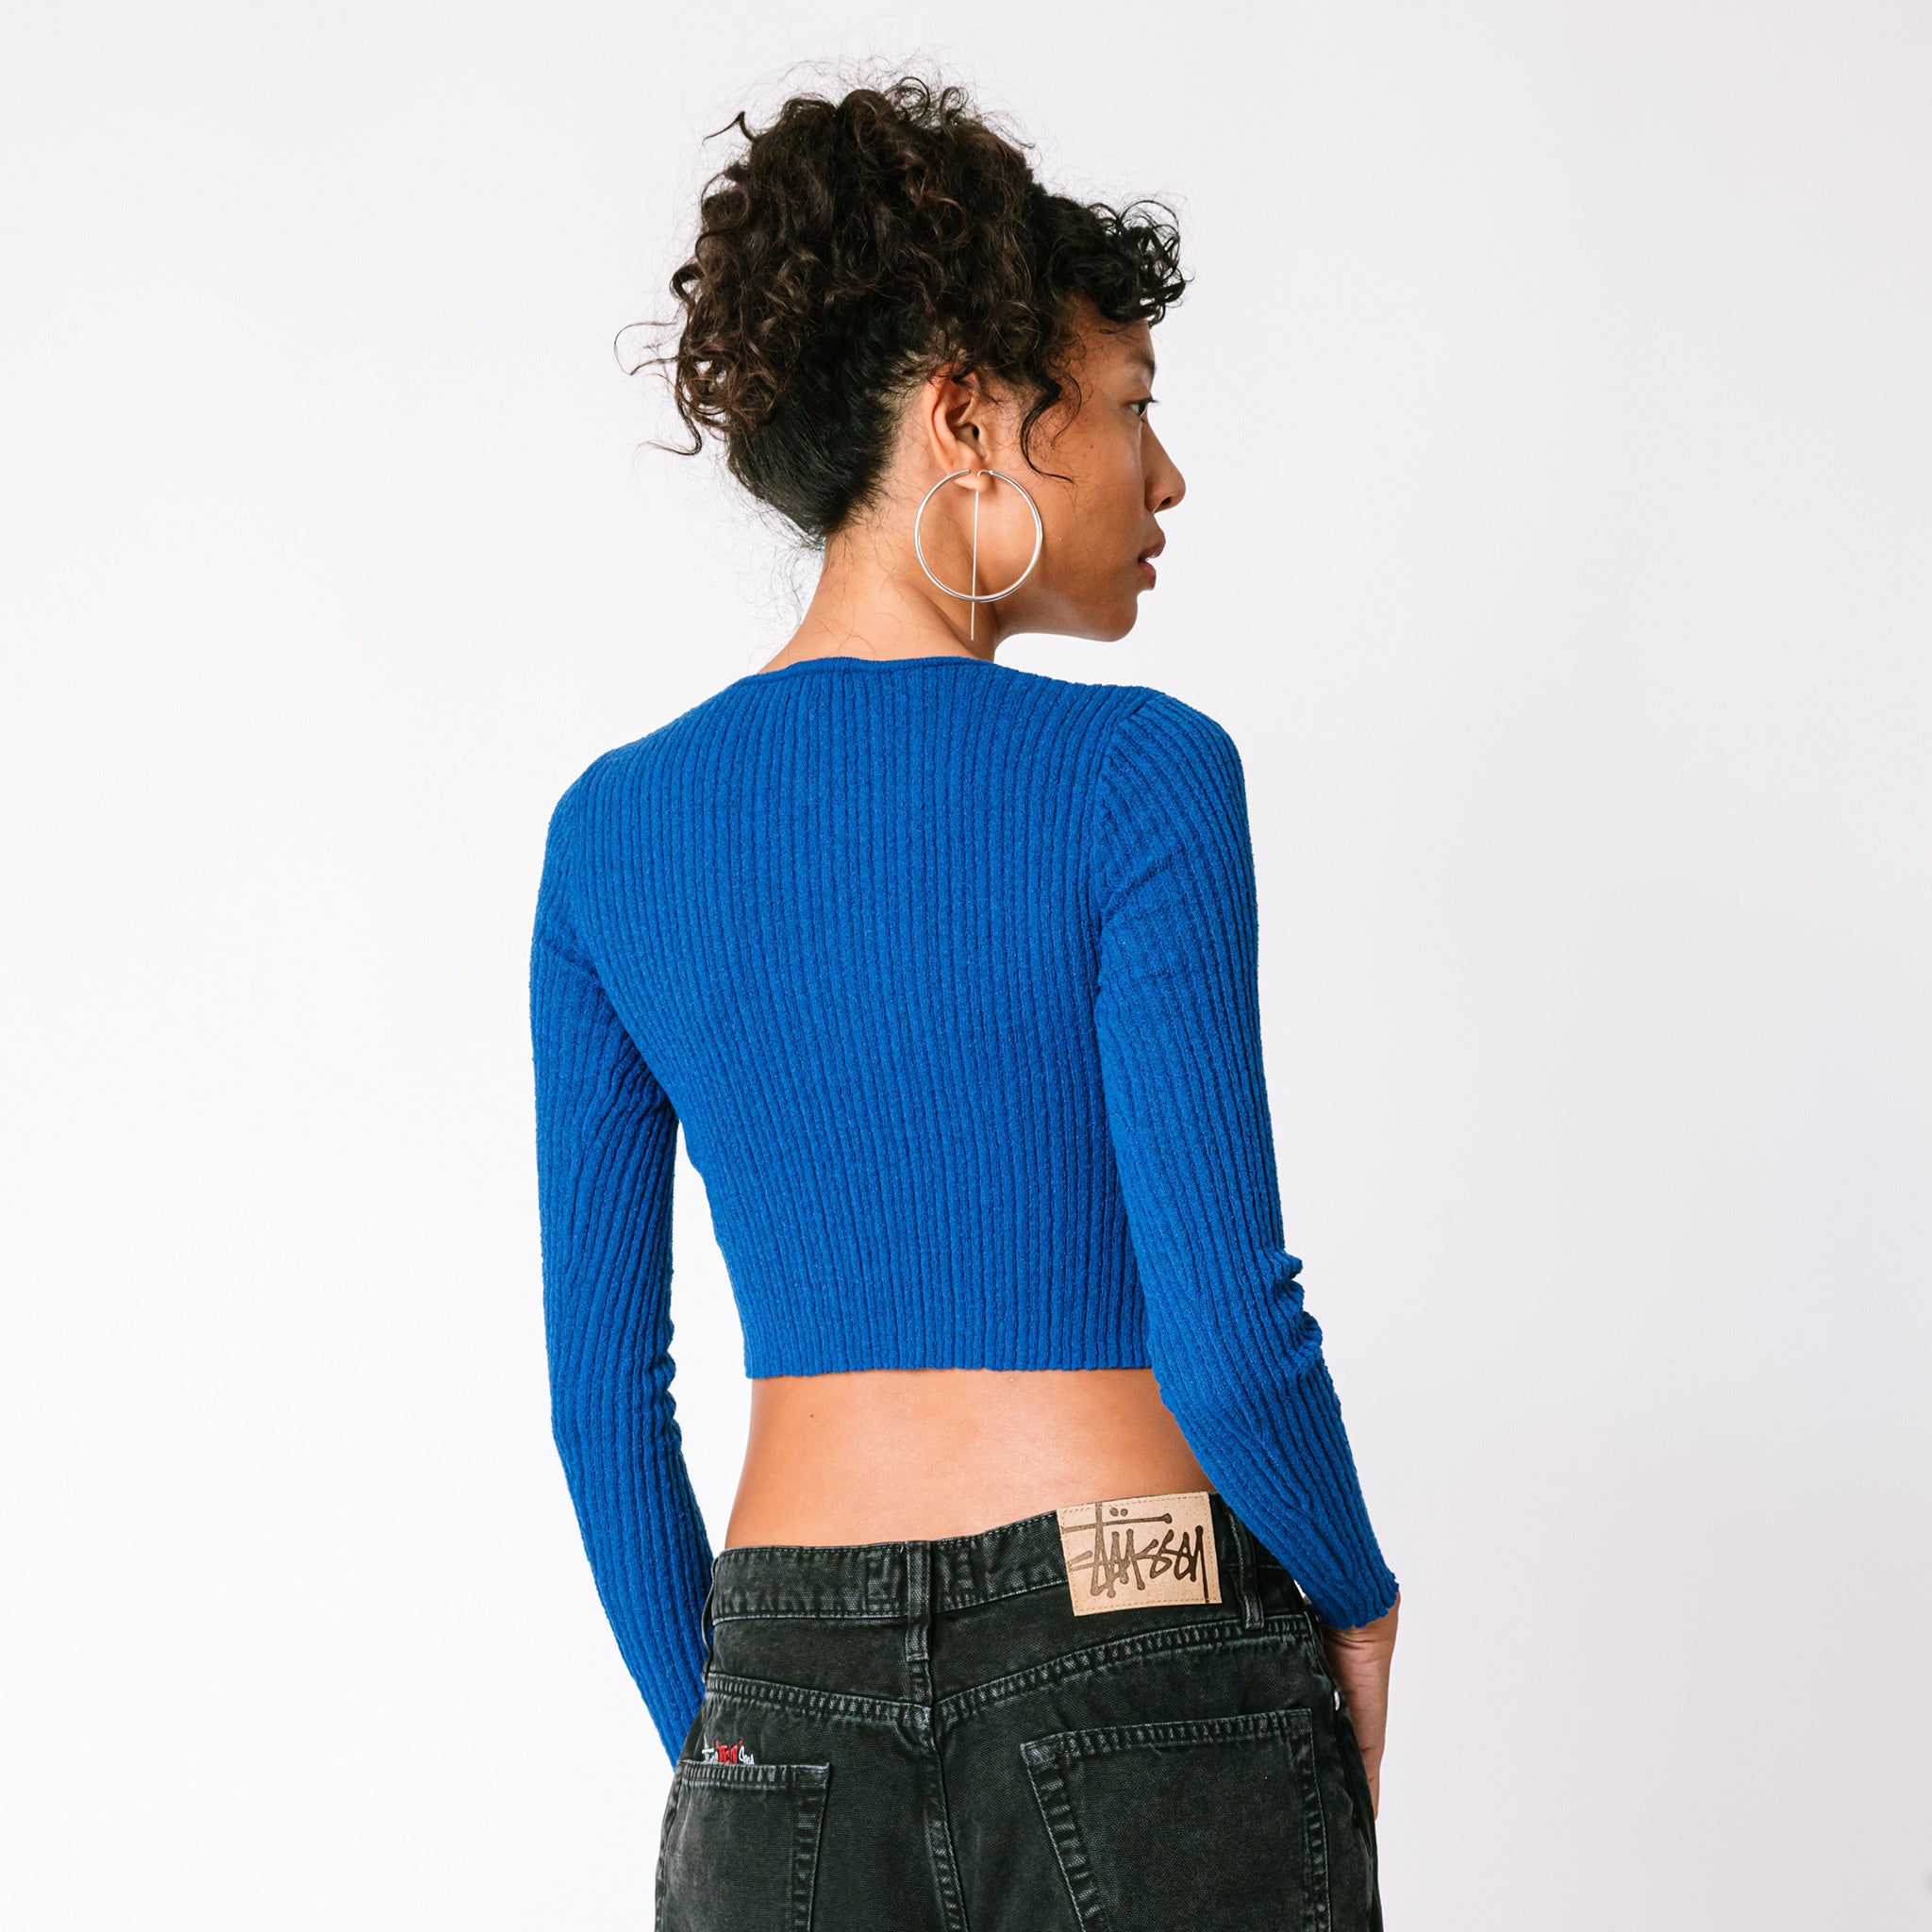 A model wears the electric blue cropped cardigan with multiple cutouts in a vertical line along the chest, back view.